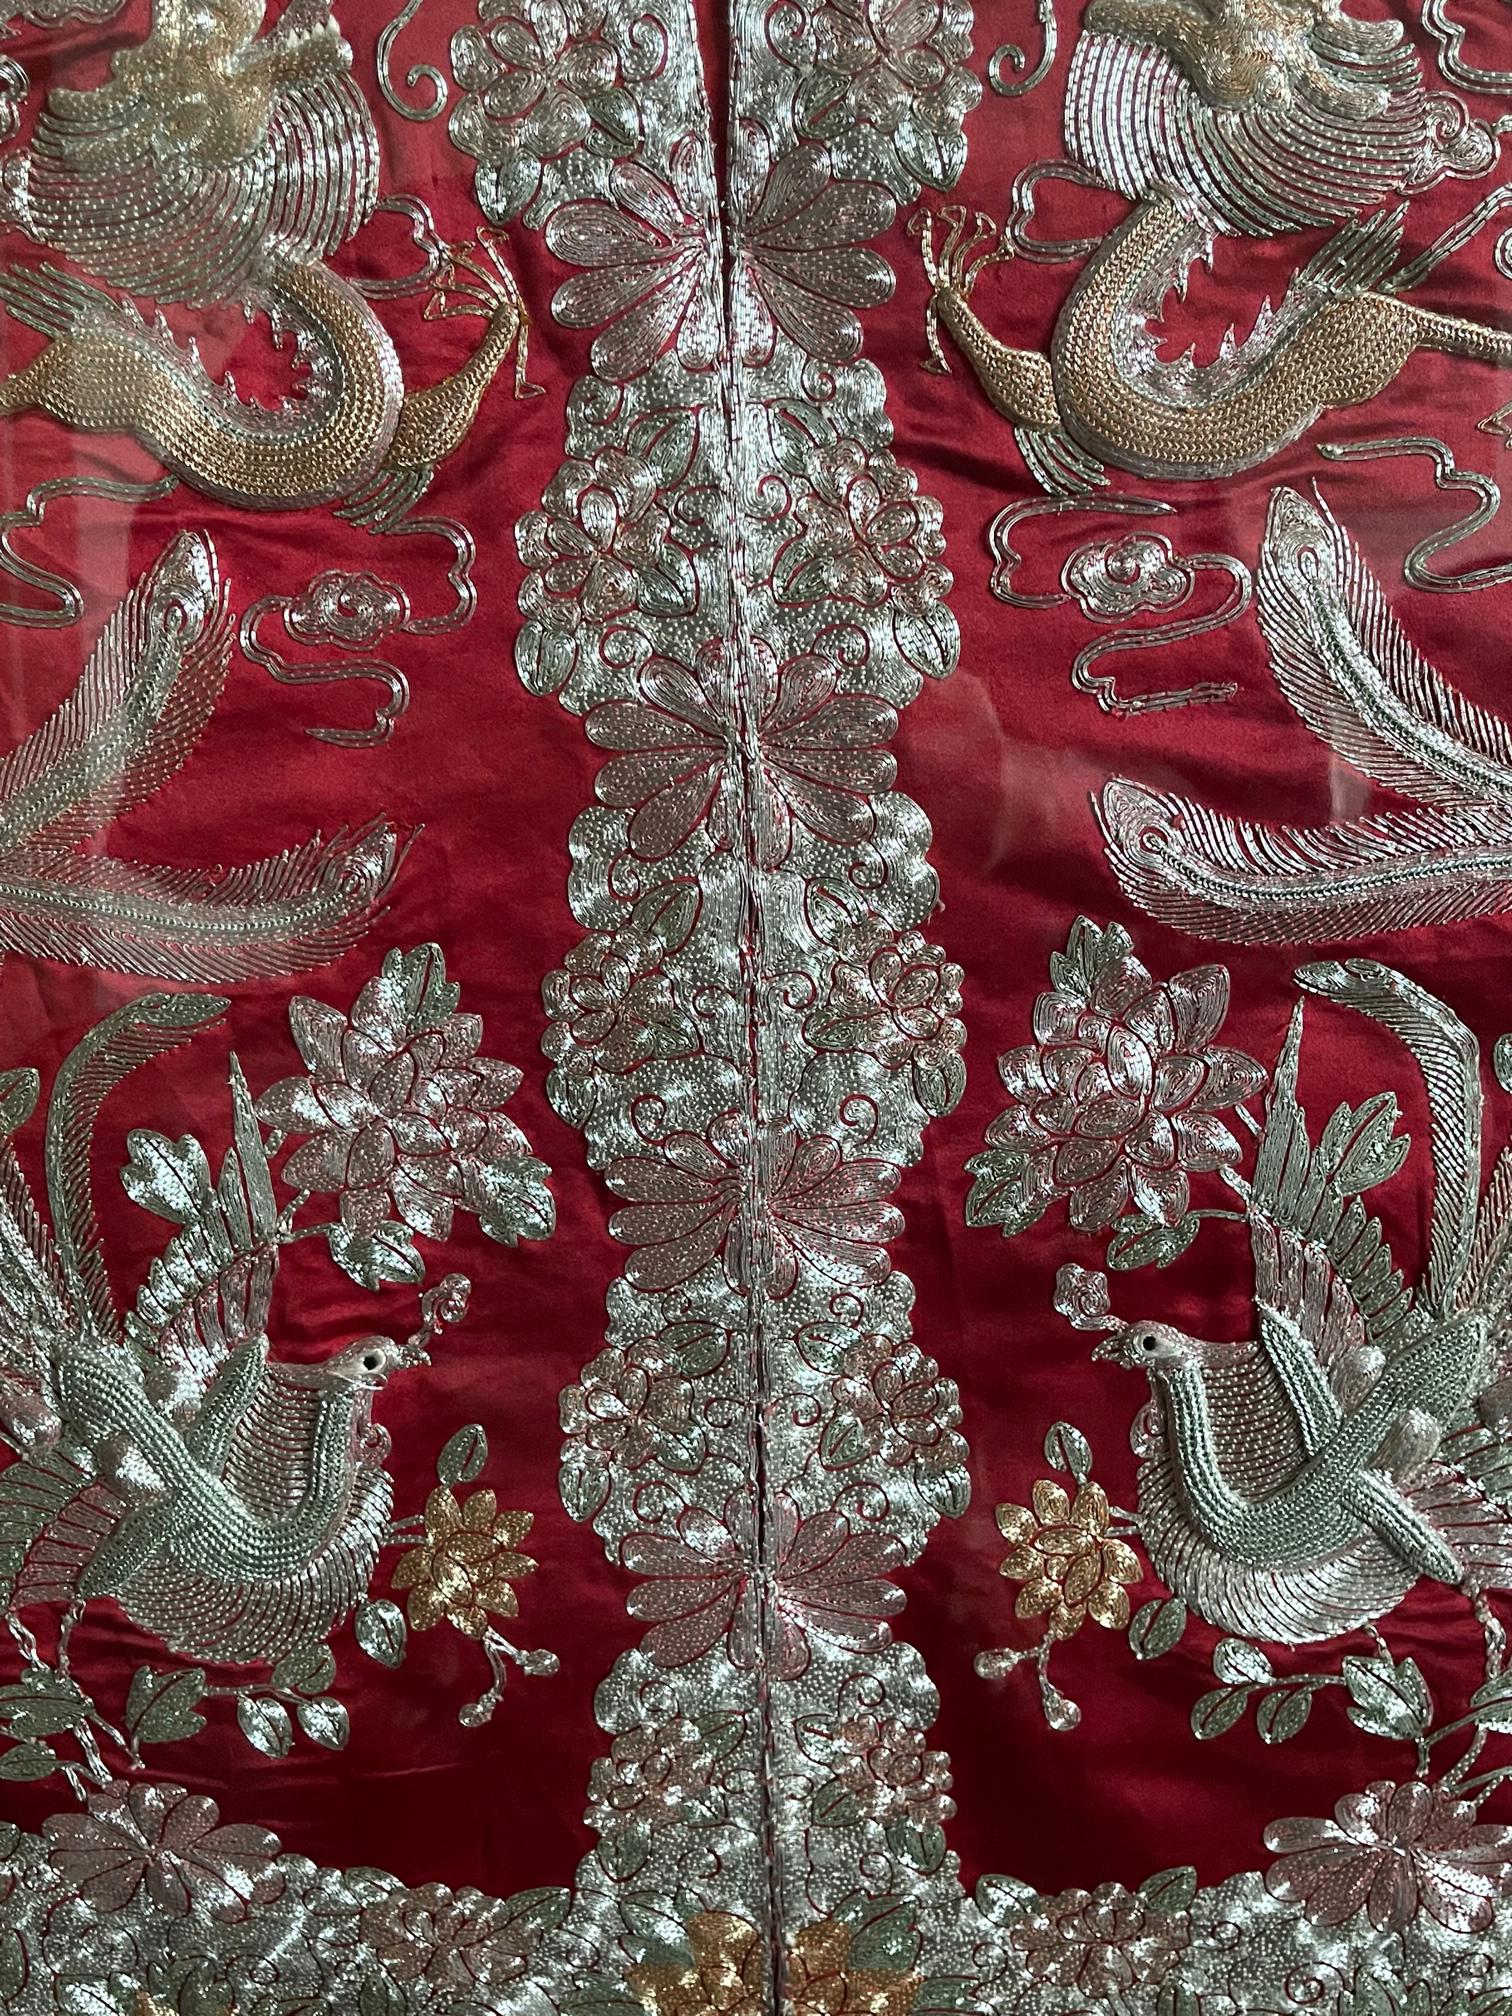 Chinese Export Framed Chinese Embroidery Southern Bridal Jacket For Sale